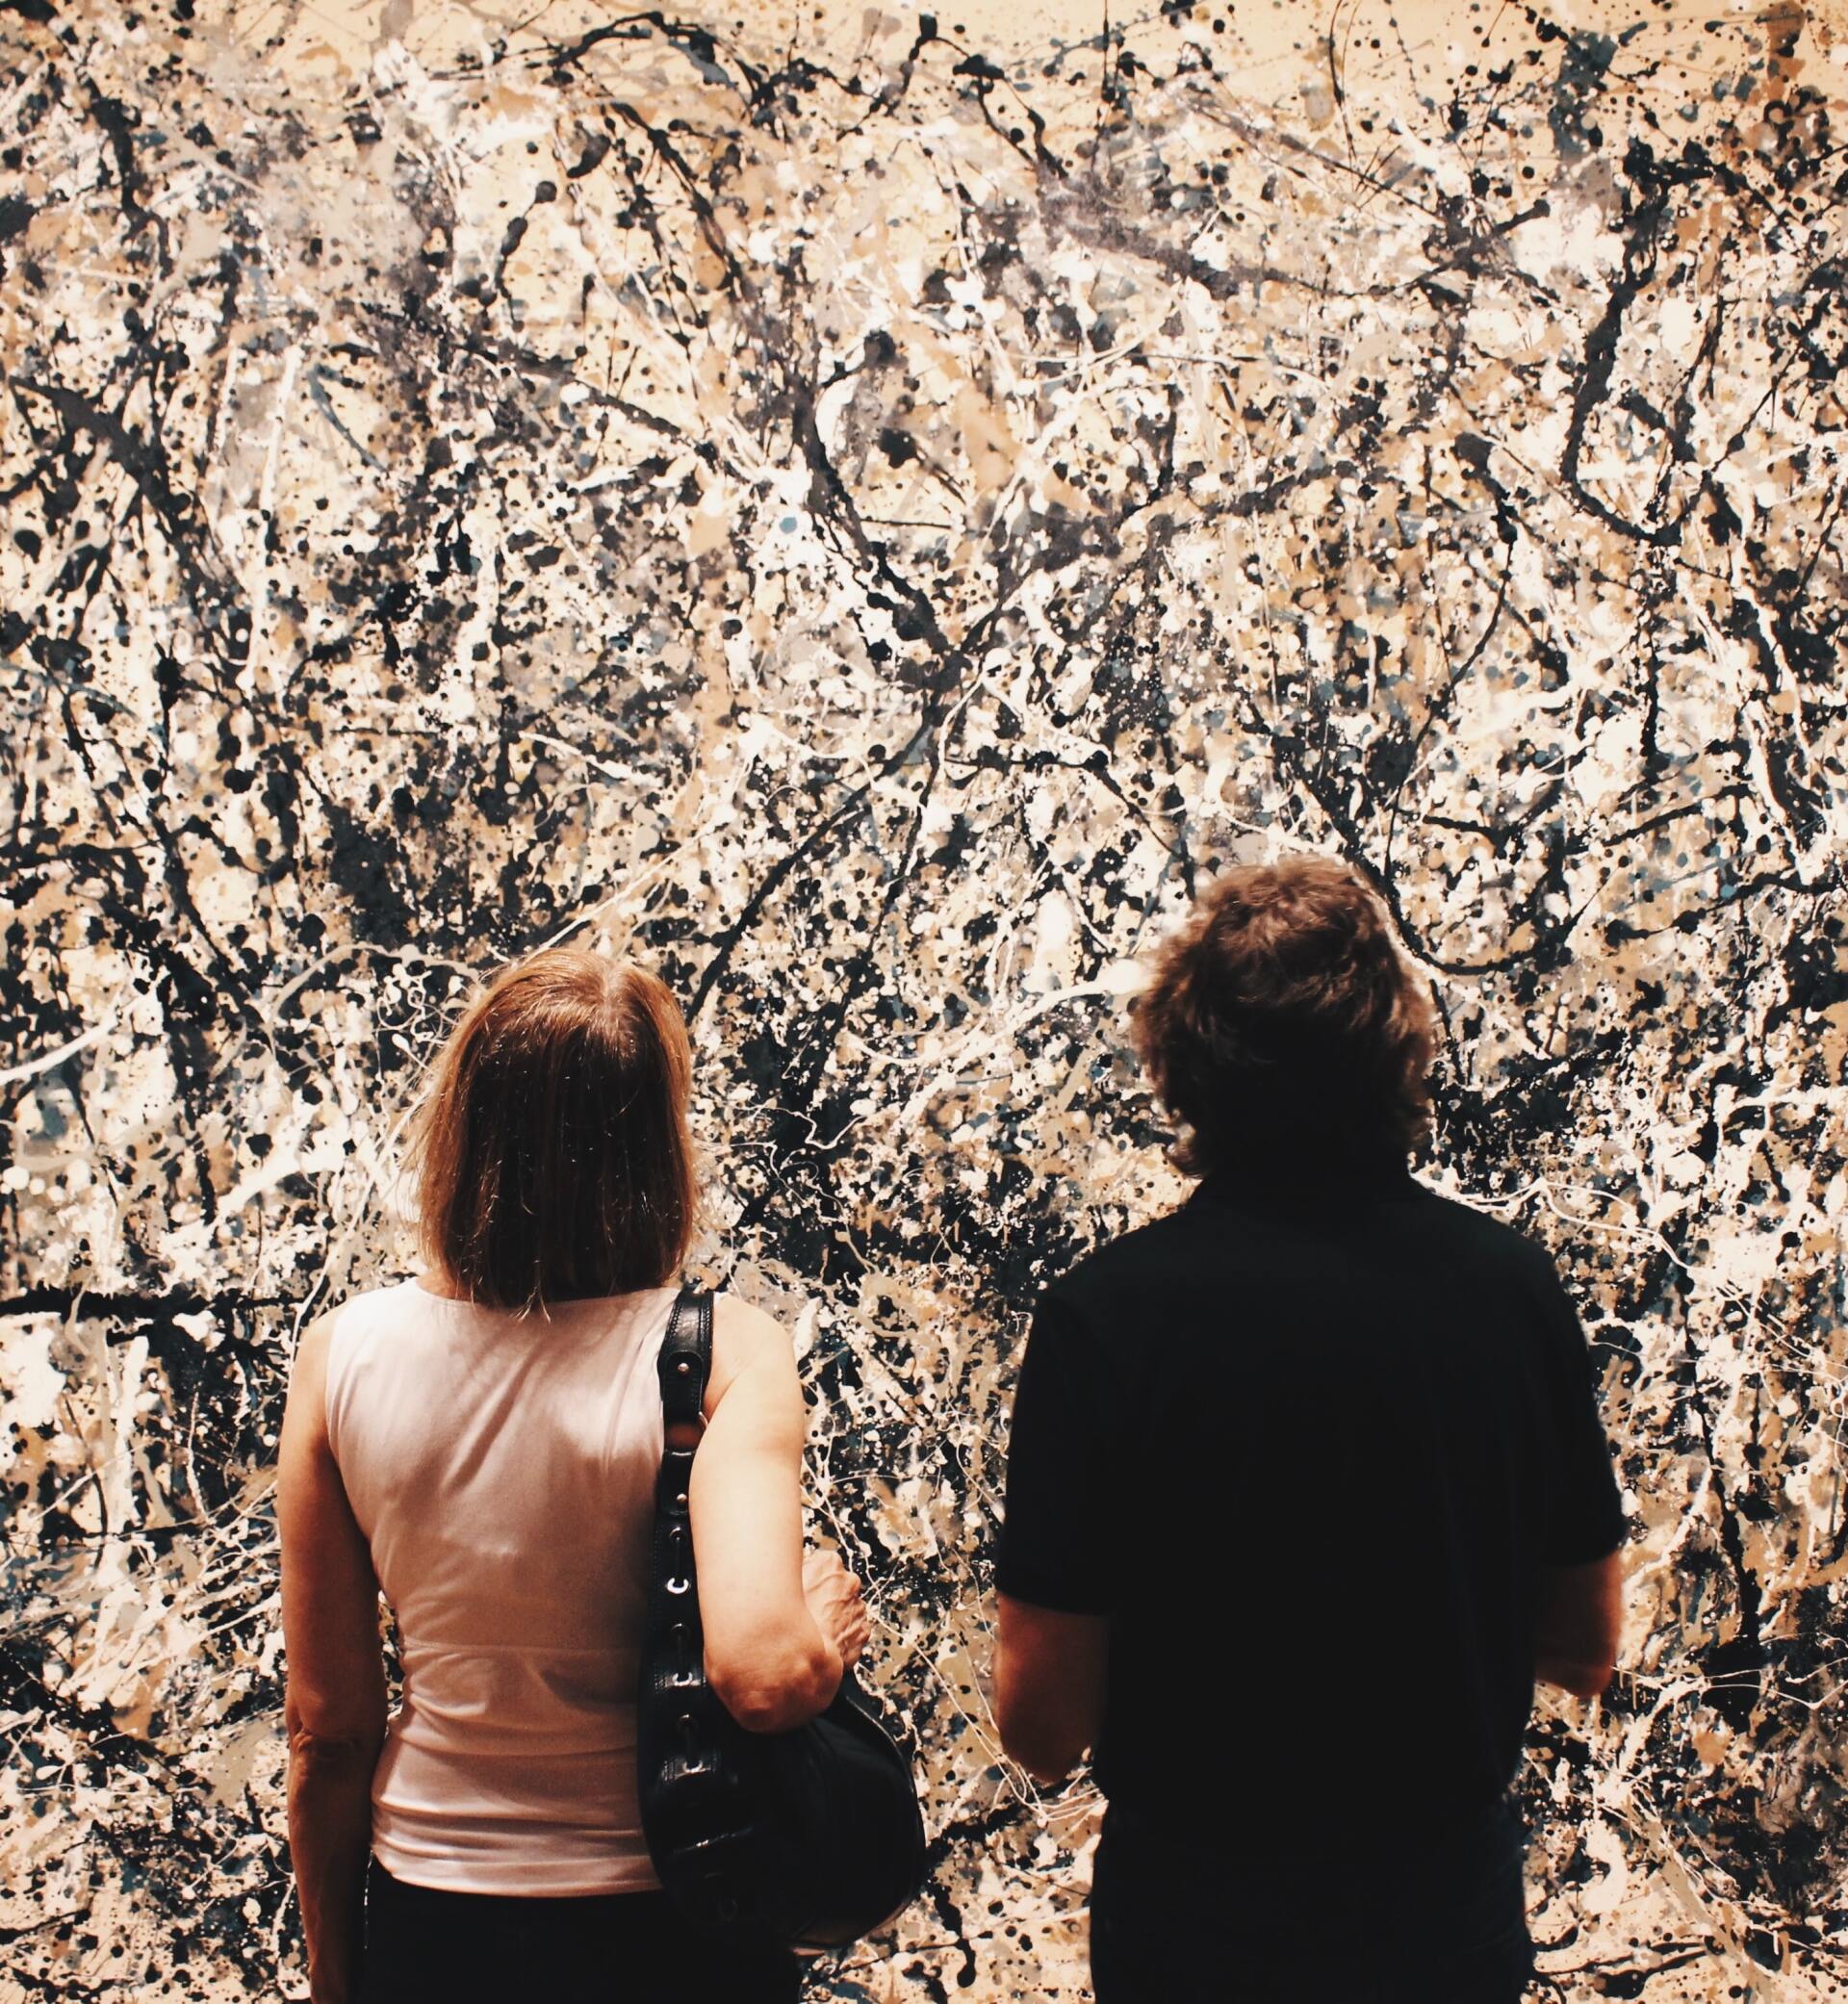 Two people staring at an artwork made from splashes of paint